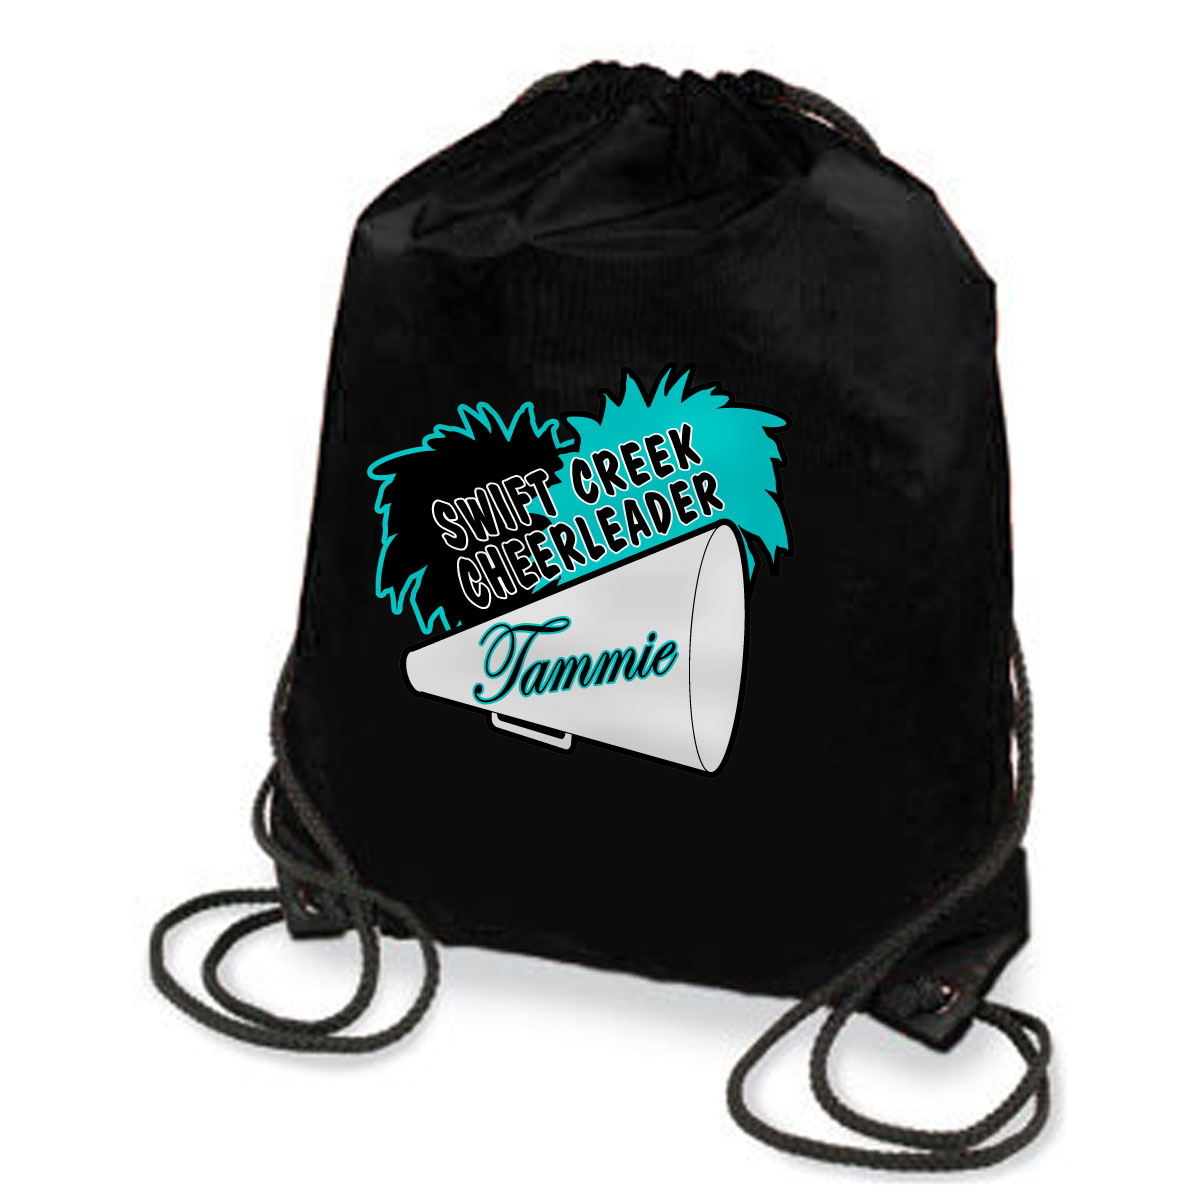 Personalized Swift Creek Cheer sport tote with gray megaphone